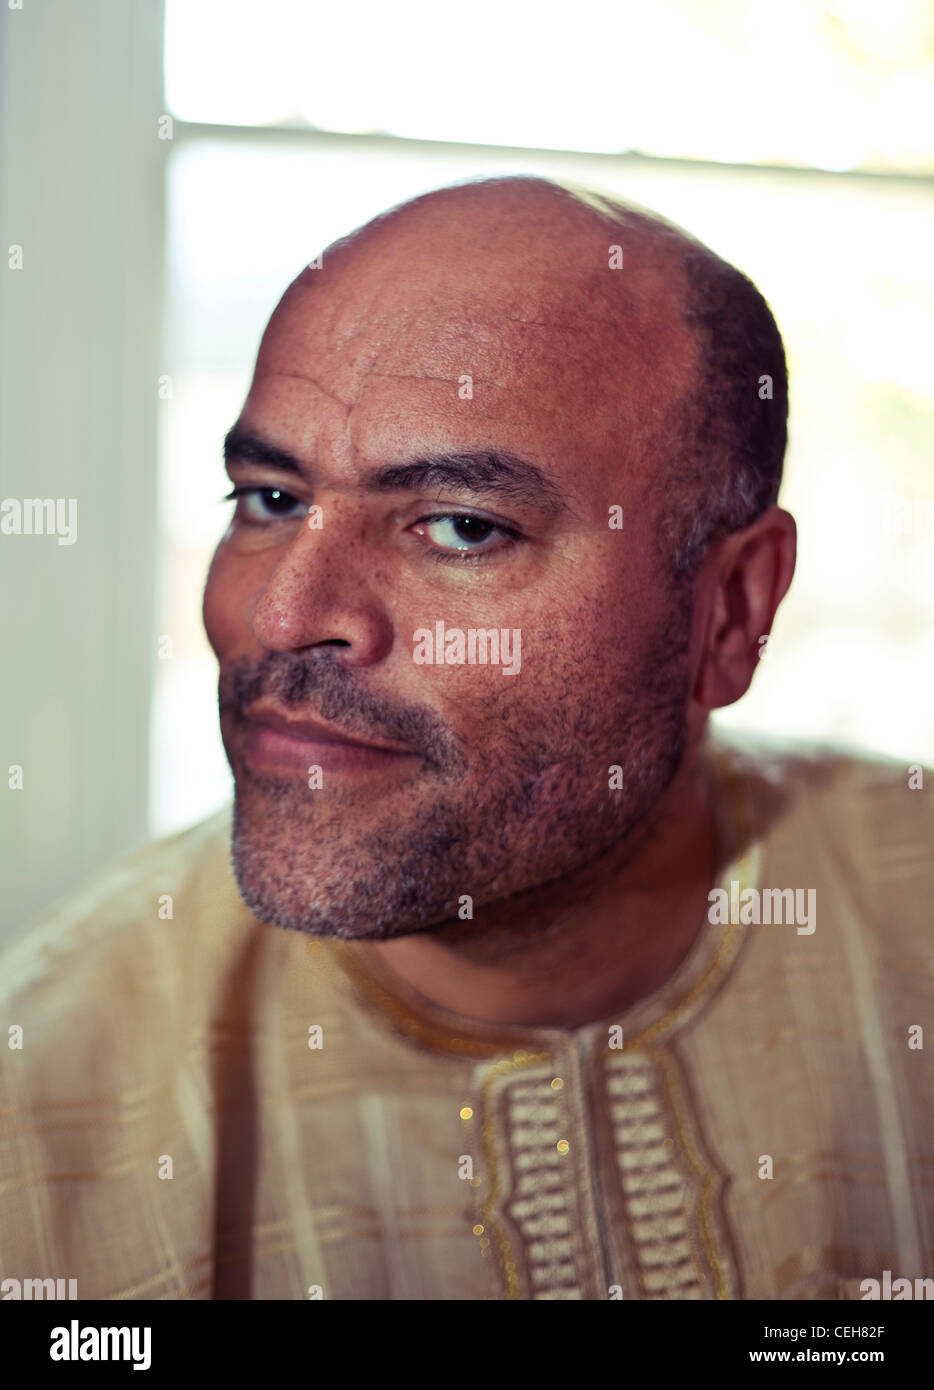 Headshot portrait of a middle aged man with bald head, London, England, UK Stock Photo